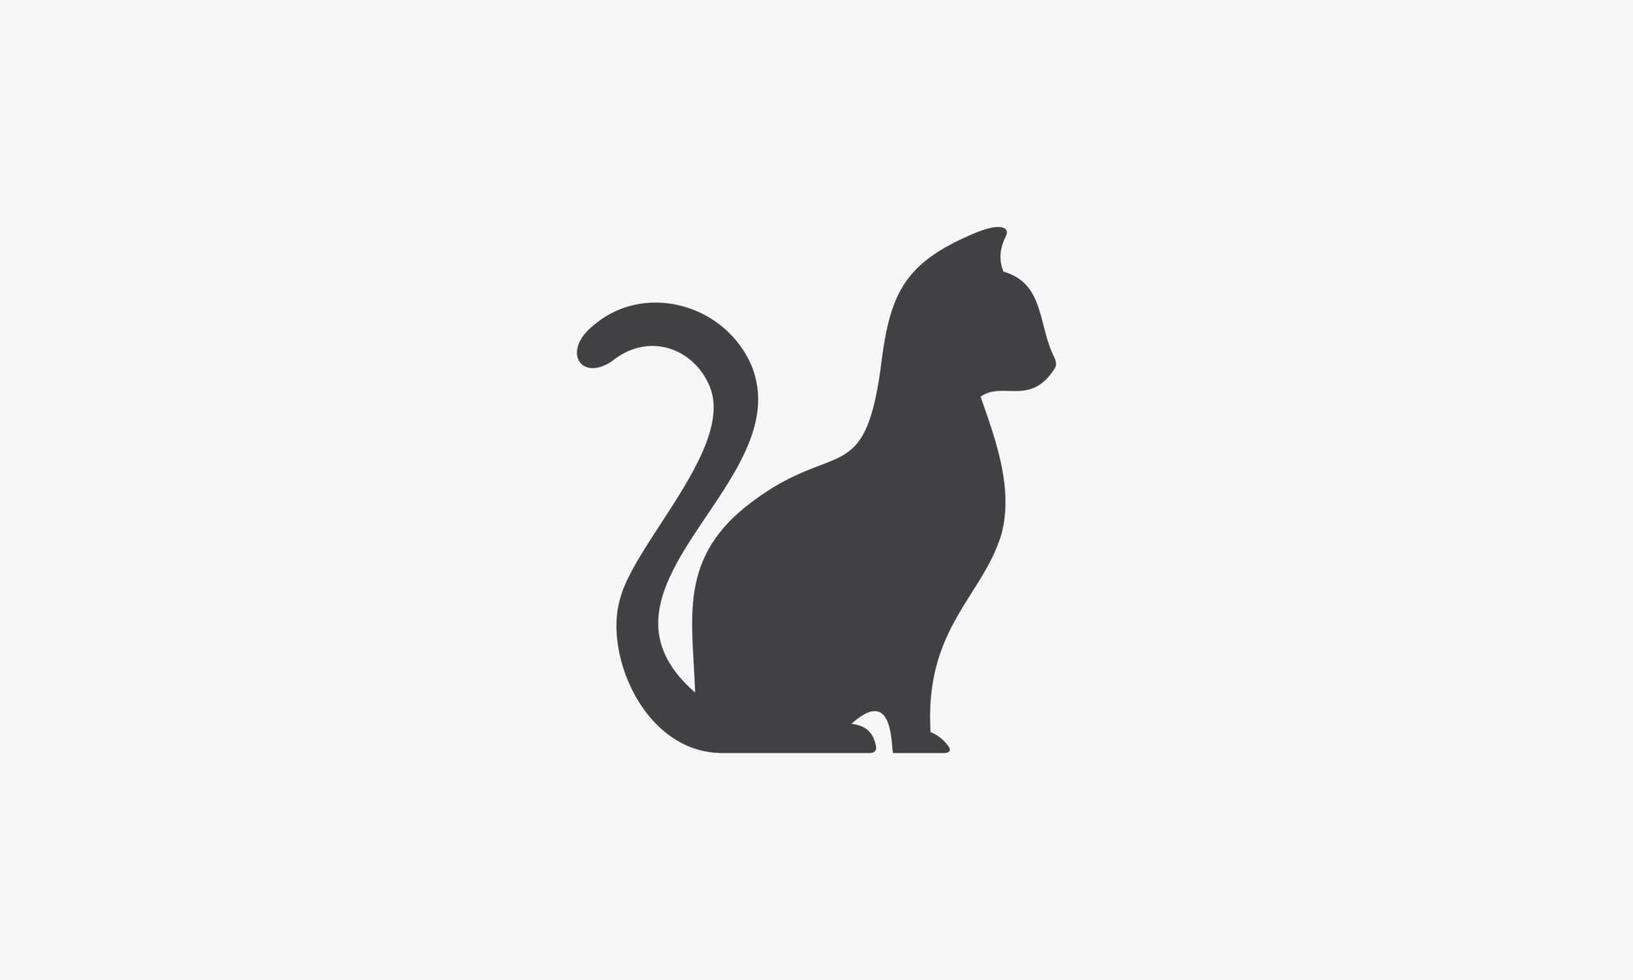 cat icon on white background. vector illustration.